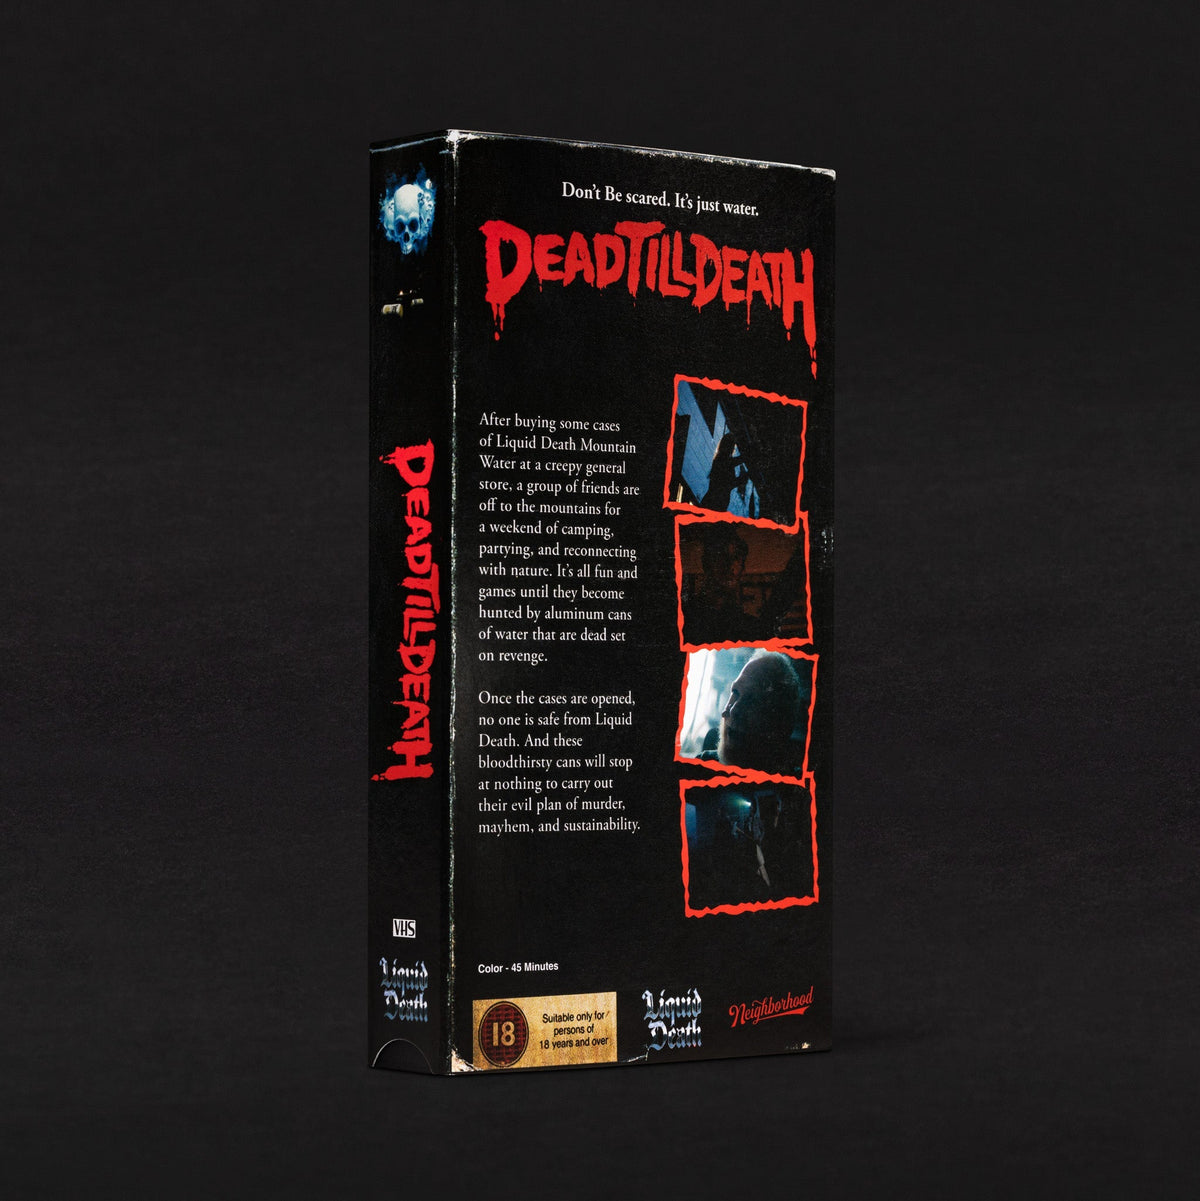 Limited Edition Dead Till Death VHS - MHDC Giveaway